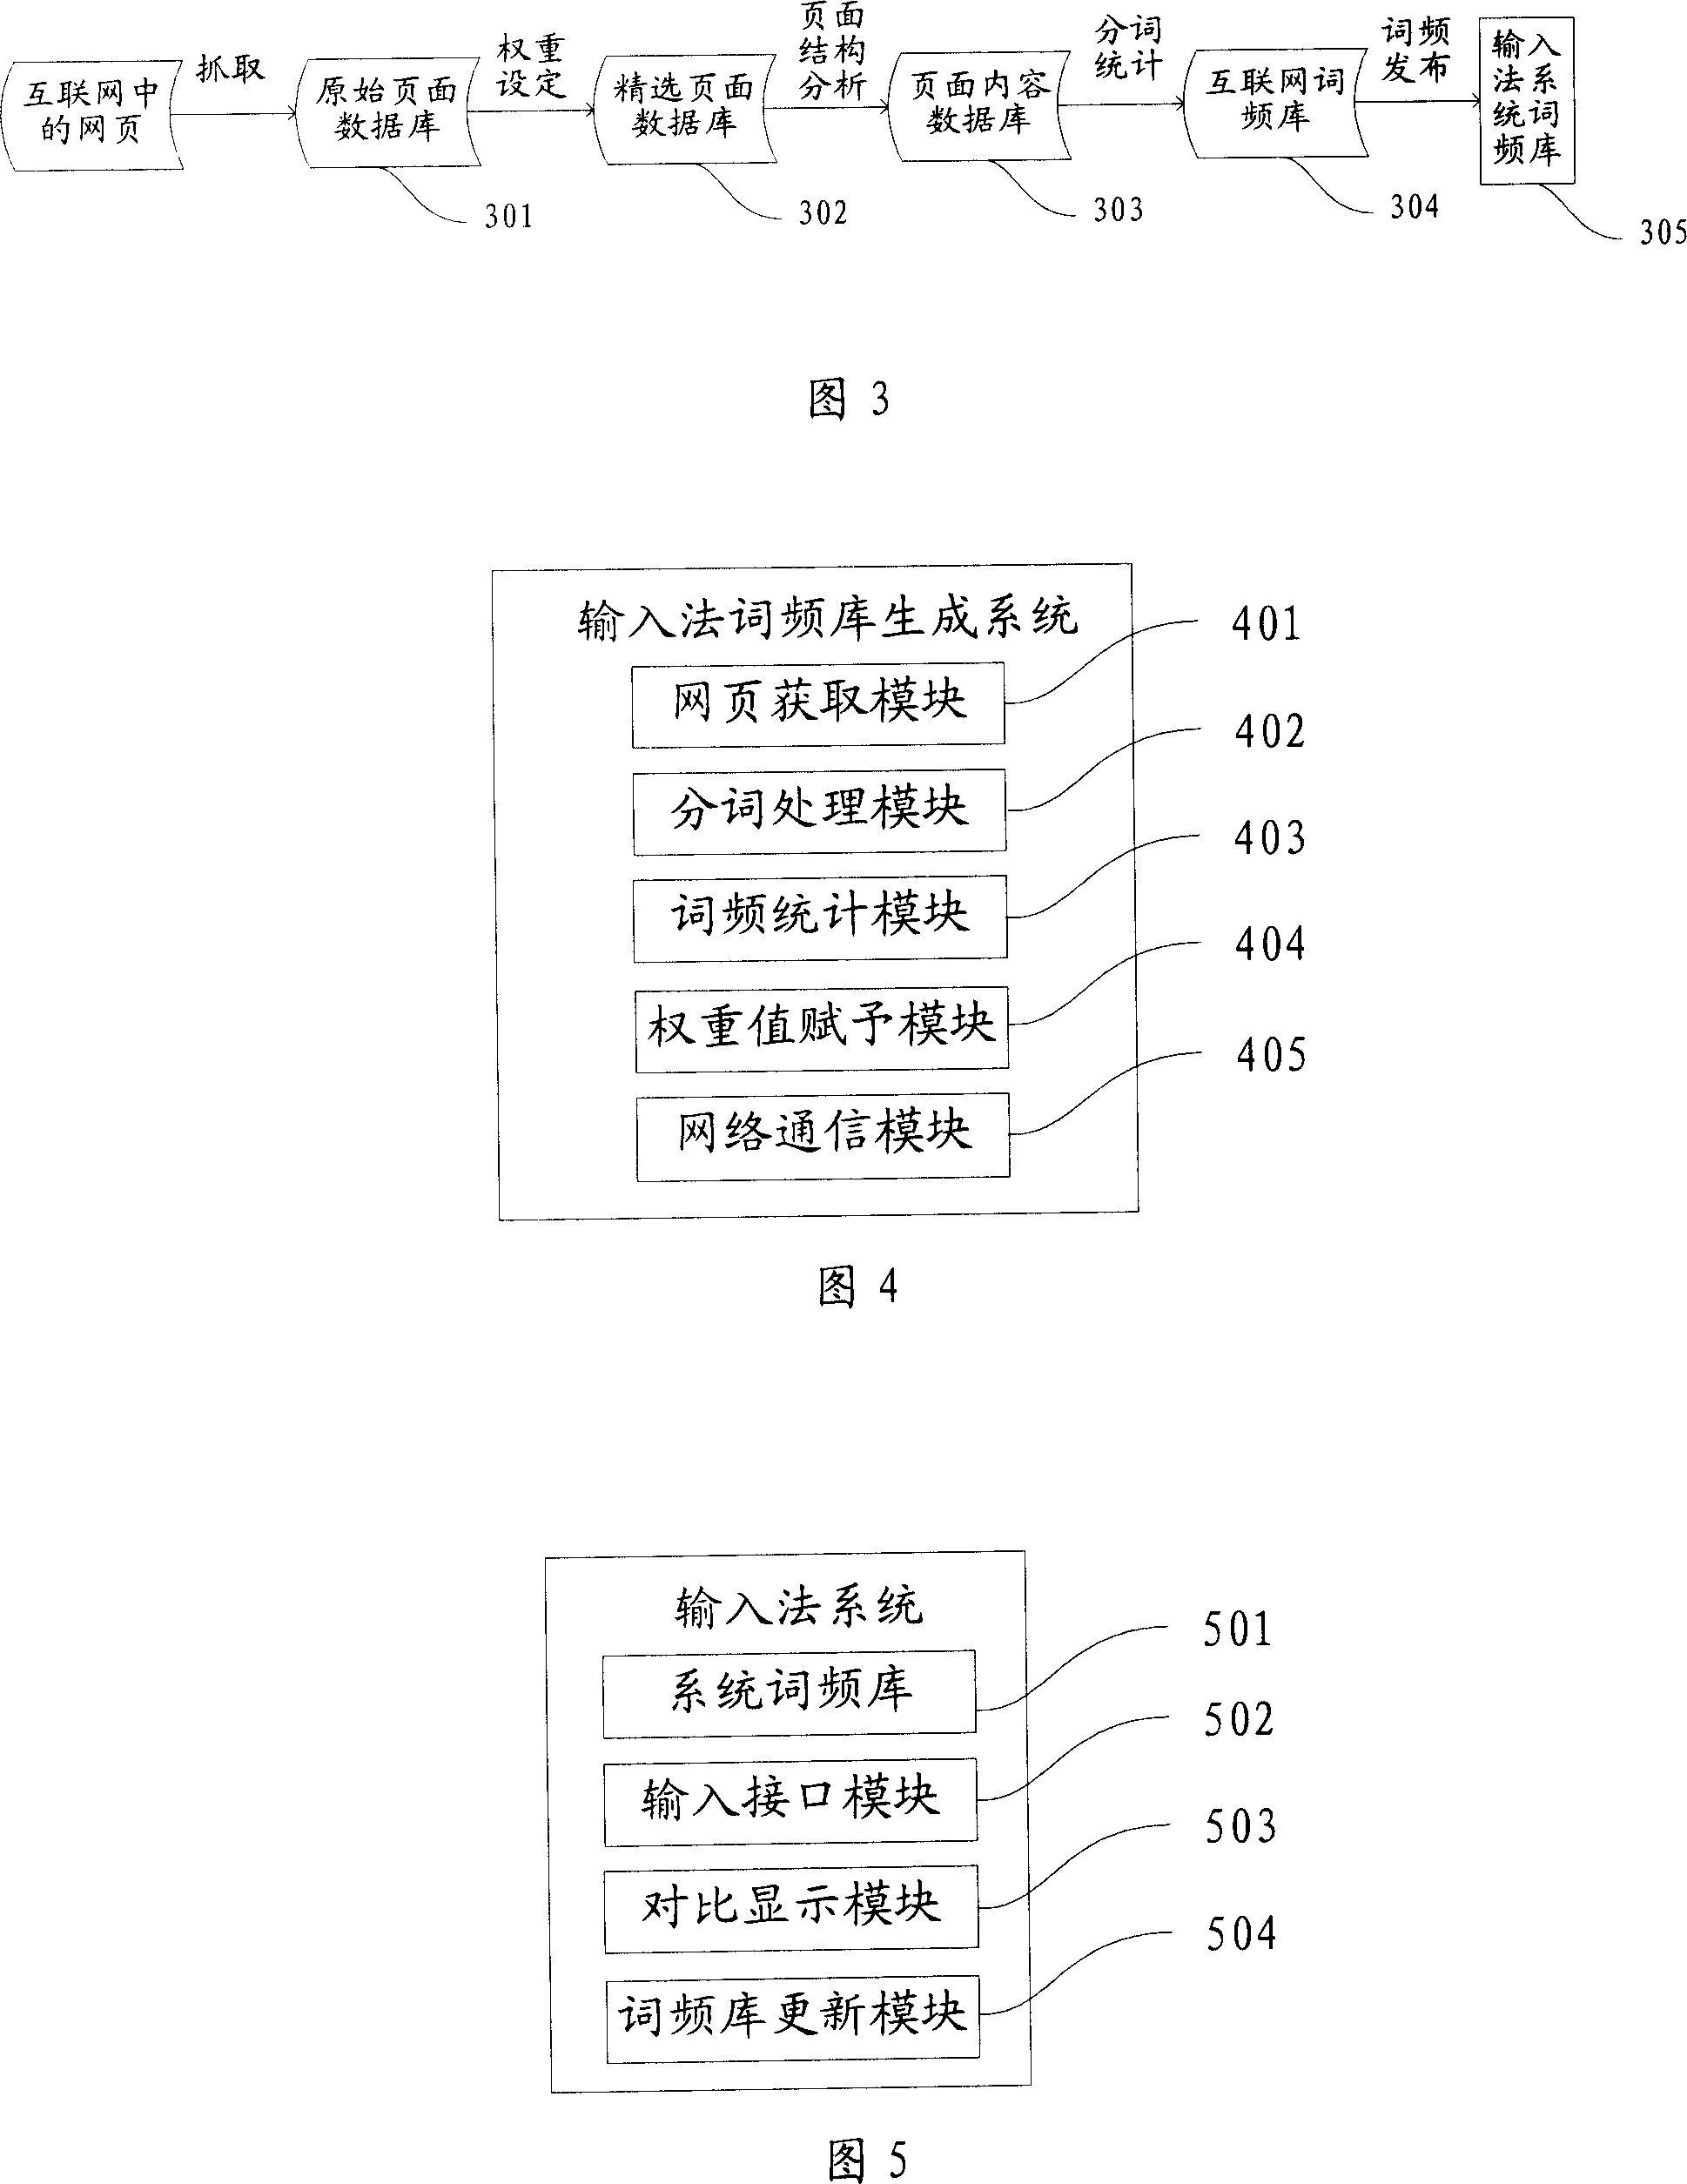 Method and system for generating input-method word frequency base based on internet information